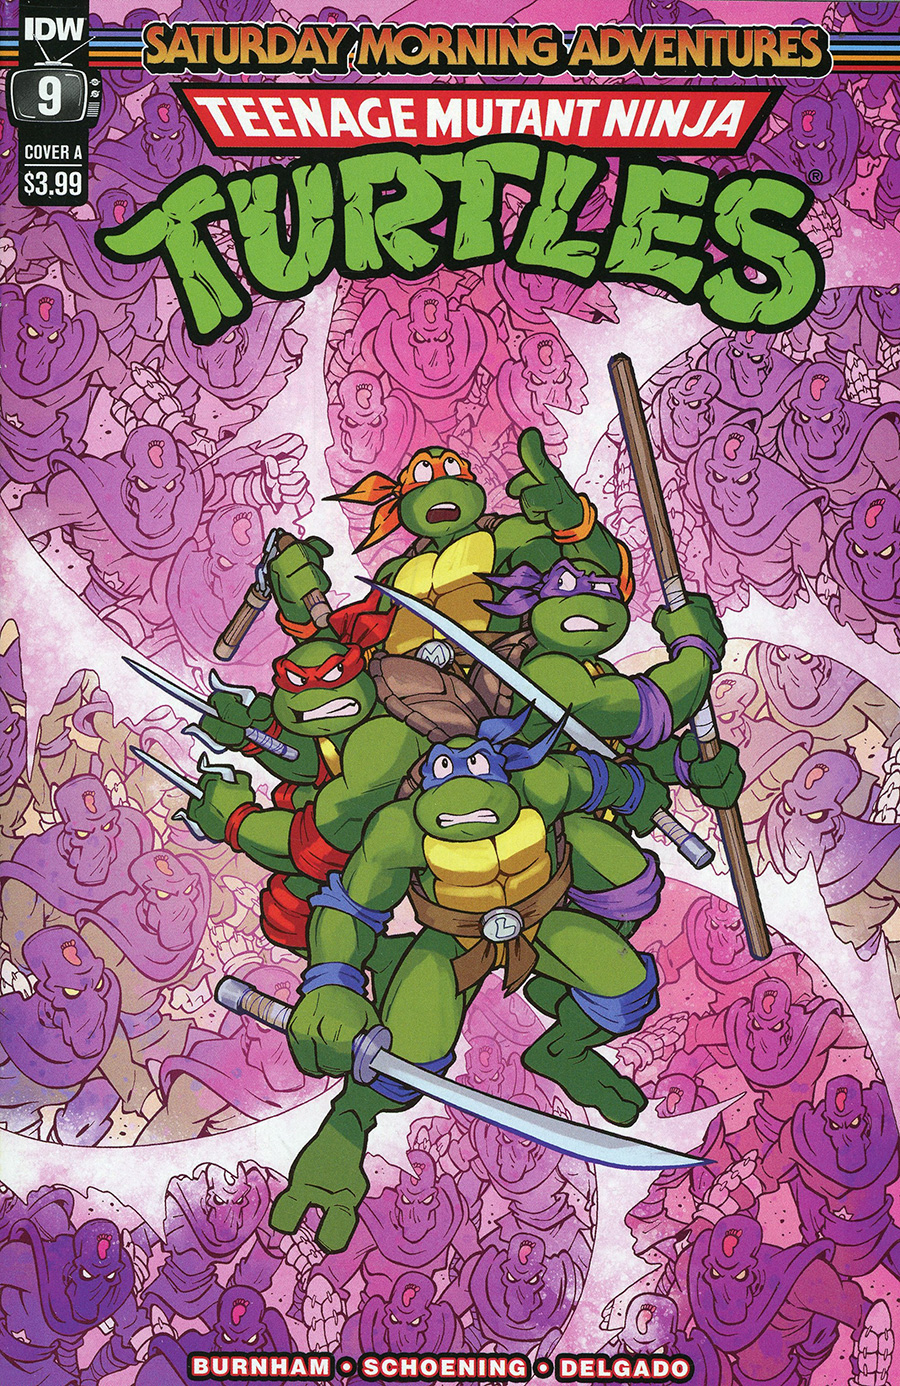 Teenage Mutant Ninja Turtles Saturday Morning Adventures Continued #9 Cover A Regular Jack Lawrence Cover